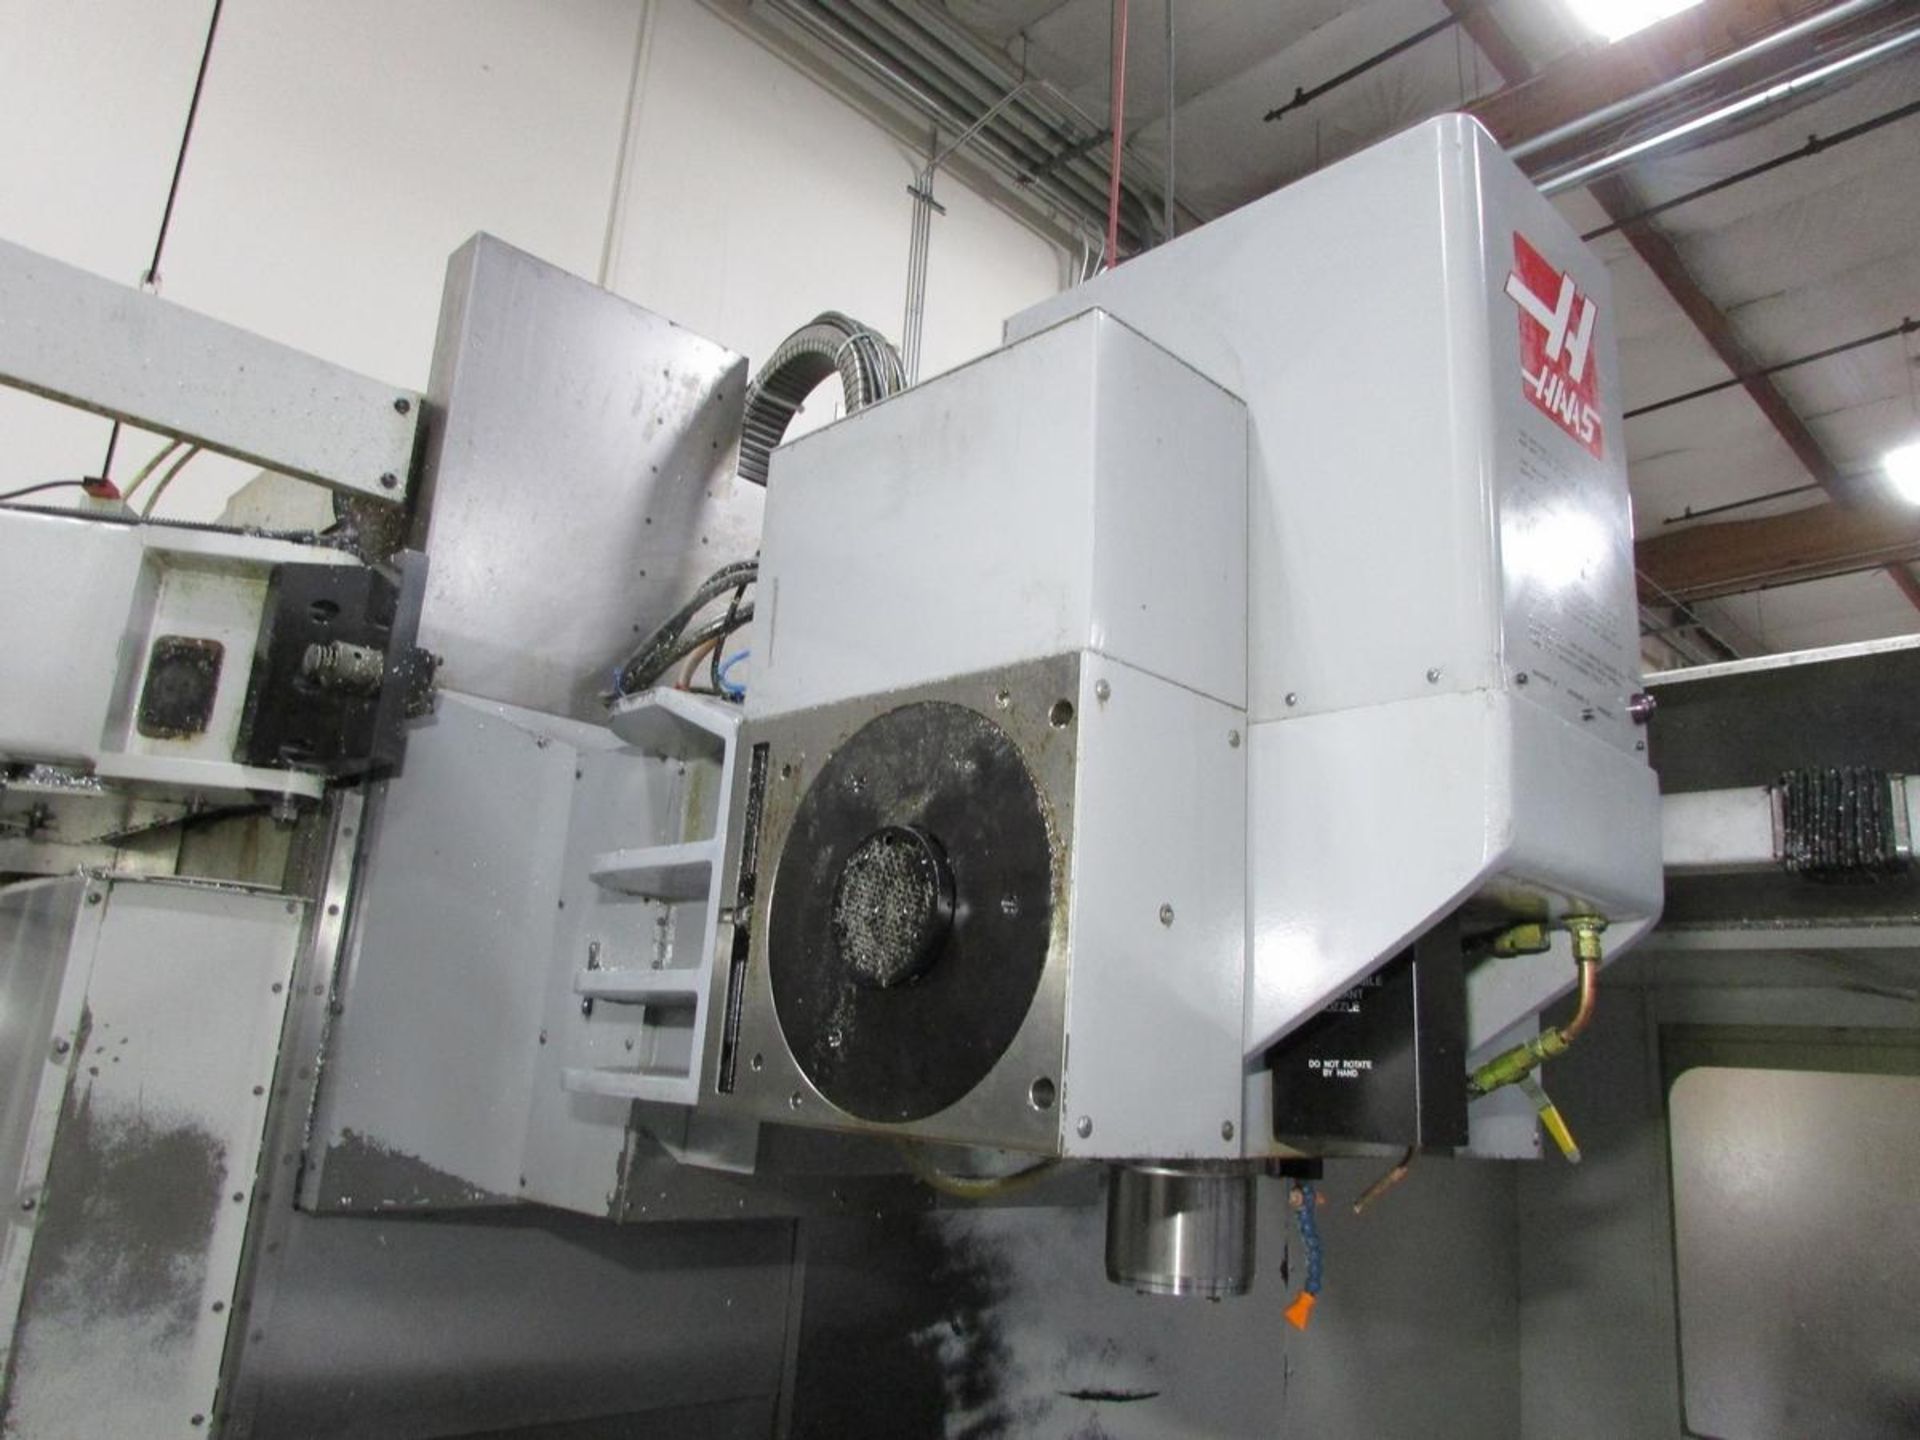 1997 Haas VR-11 5-Axis CNC Vertical Maching Center - Image 9 of 30